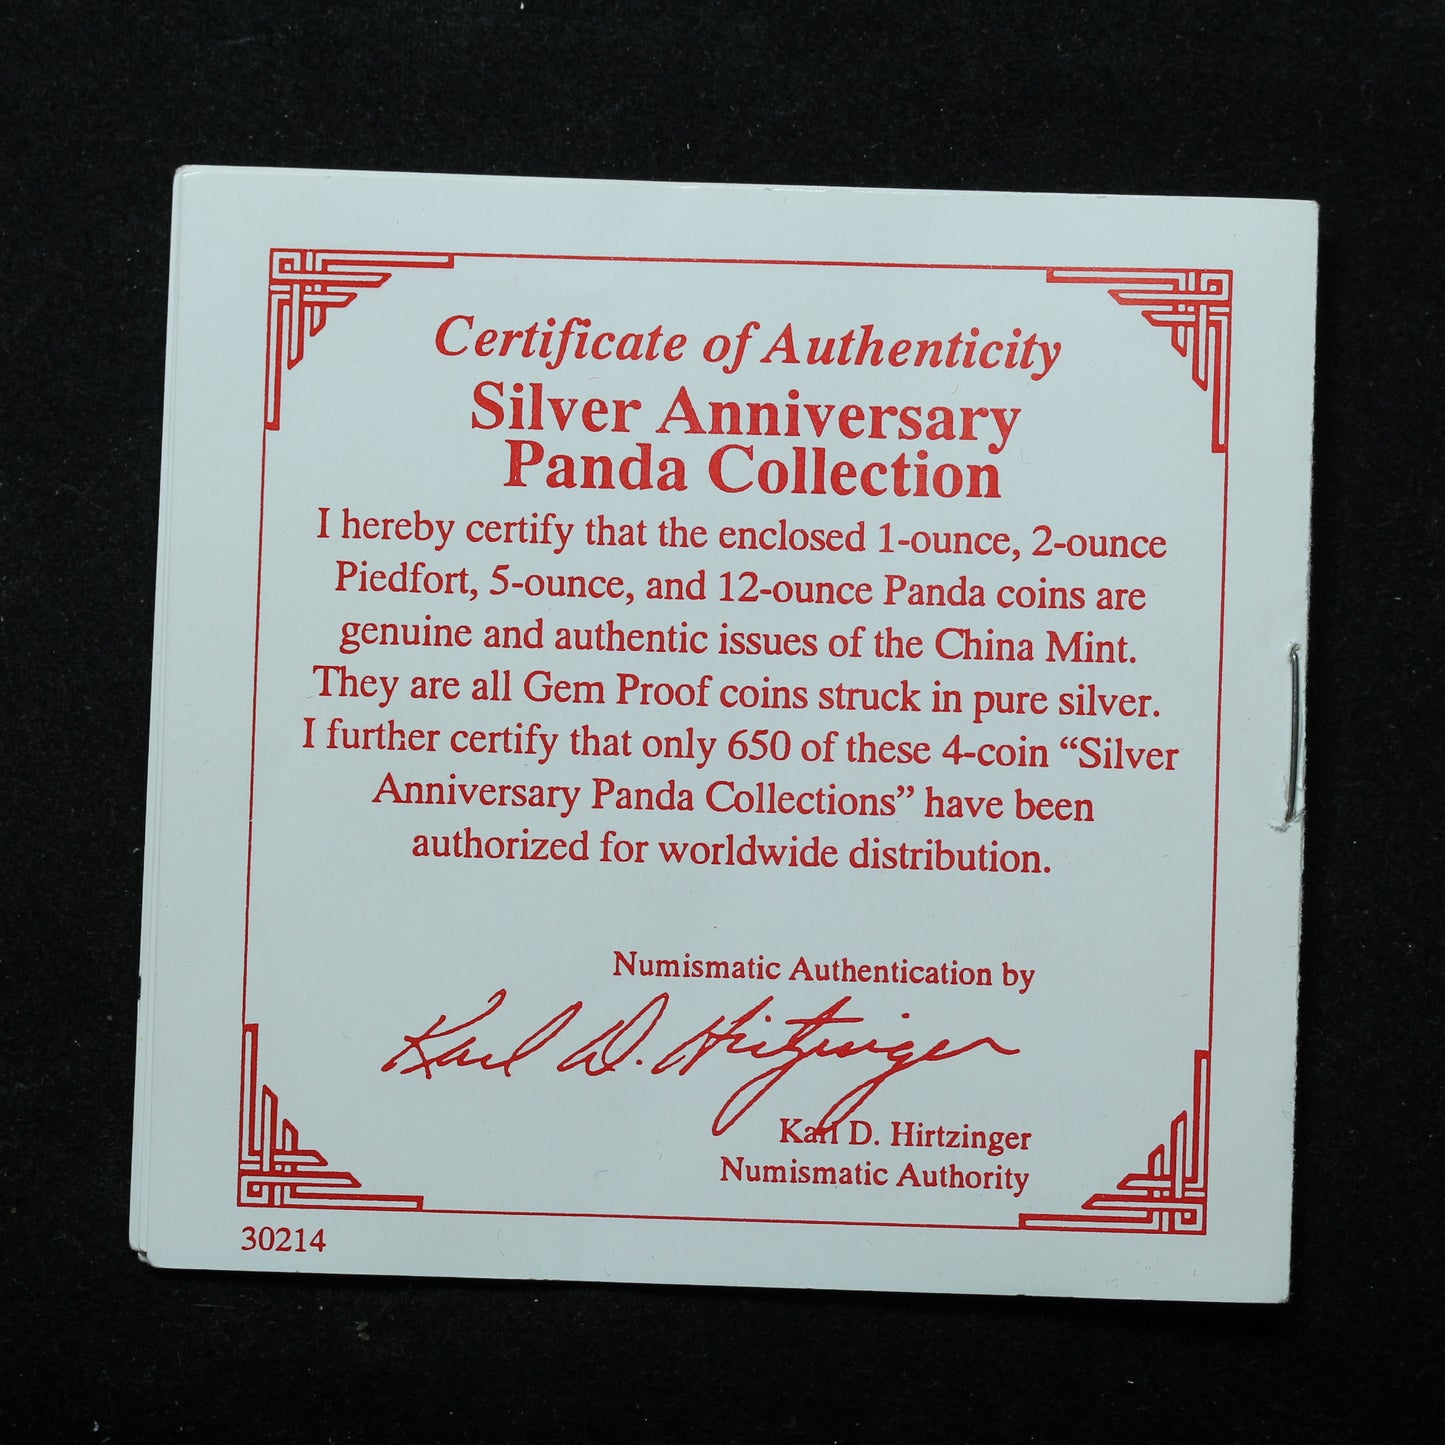 1991 China 10th Anniversary Panda Collection 4 Coin Silver Proof Set Sealed!